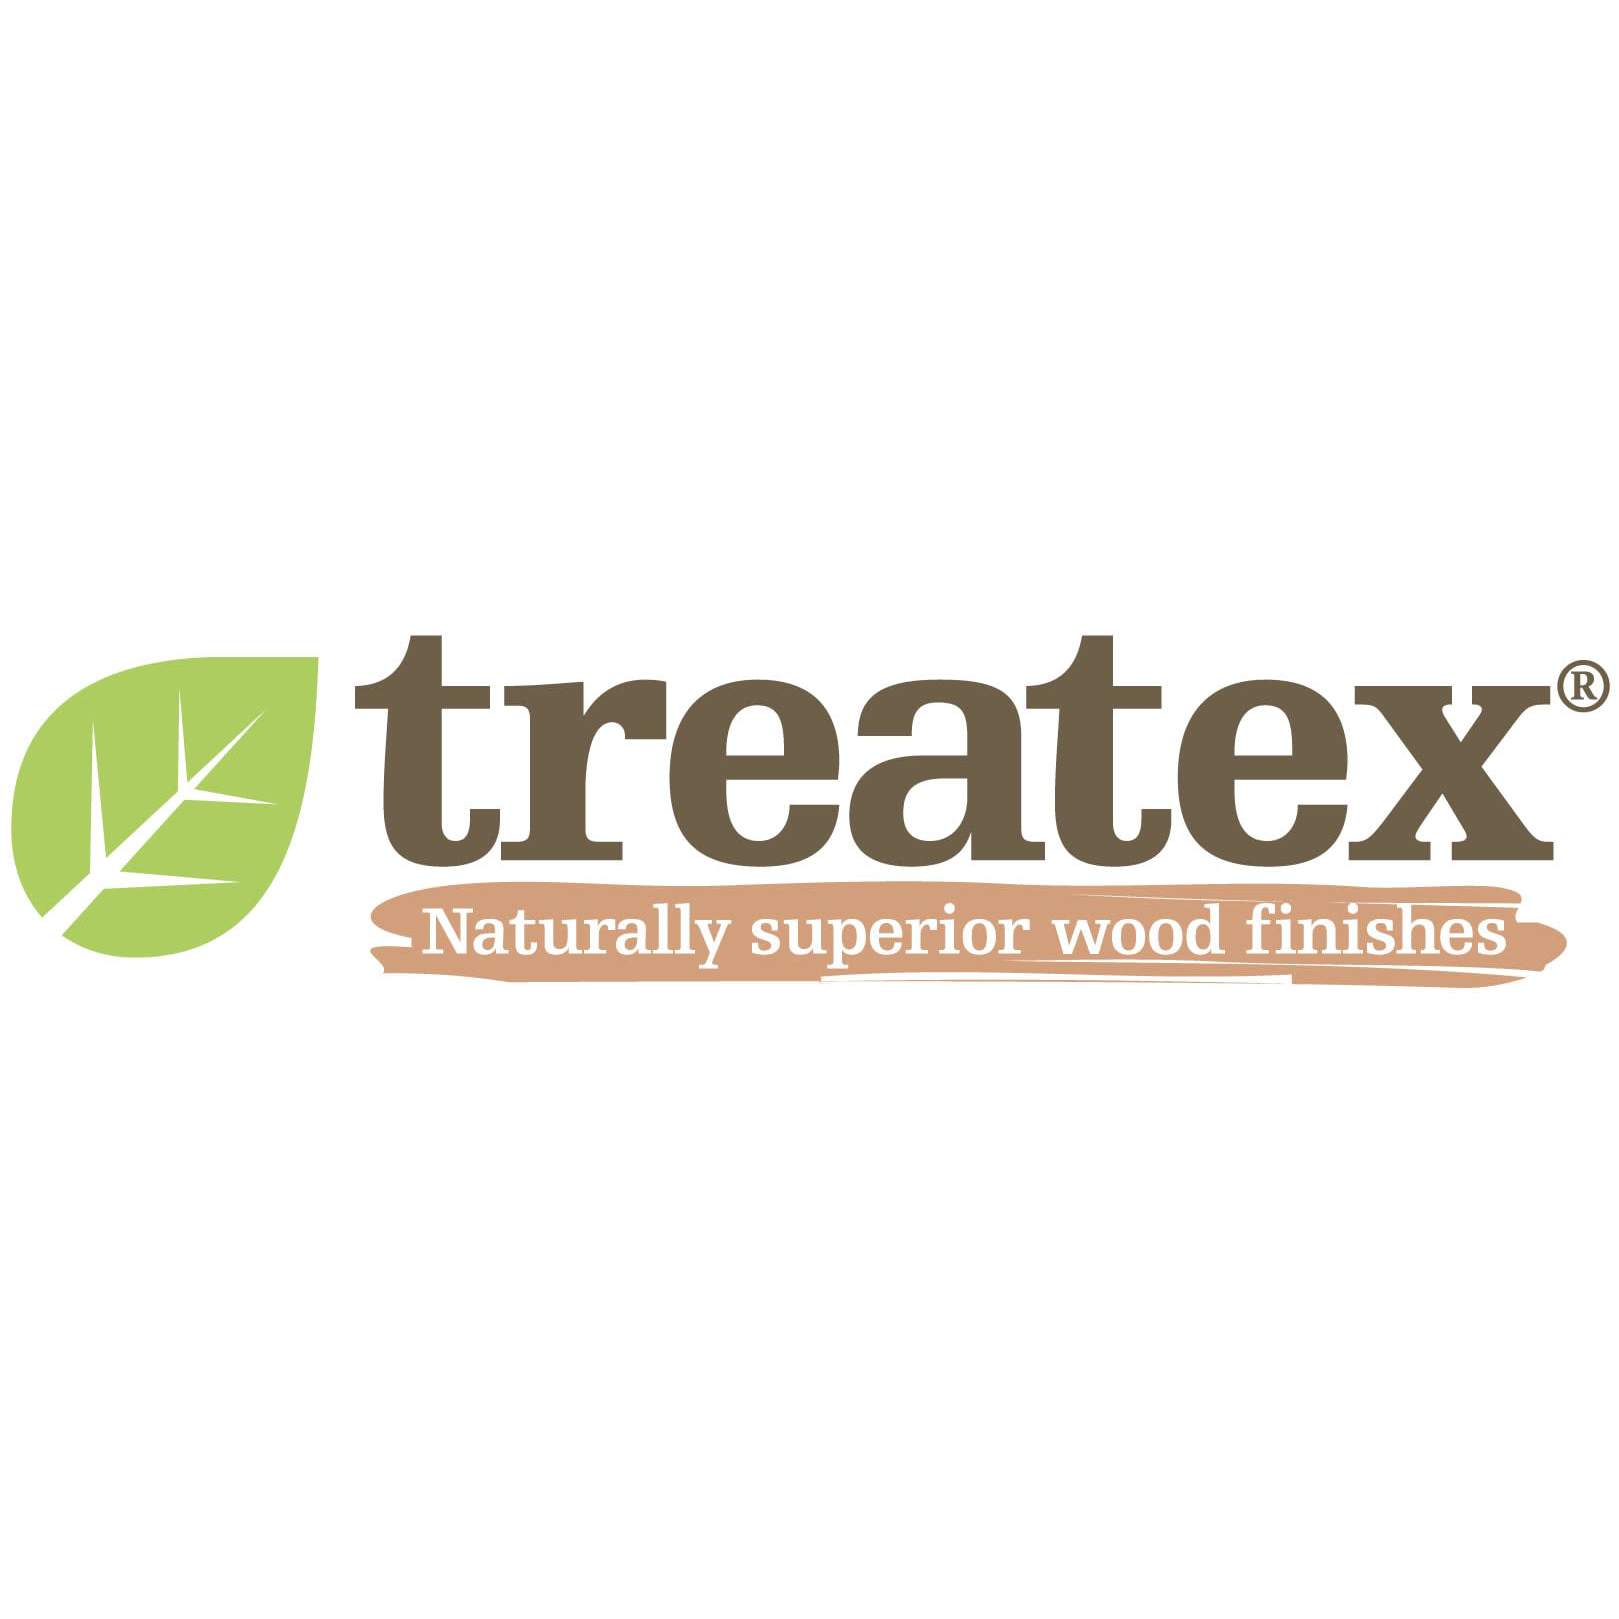 Treatex - Superior Wood Finishes - Thame, Oxfordshire OX9 3GQ - 01844 260416 | ShowMeLocal.com